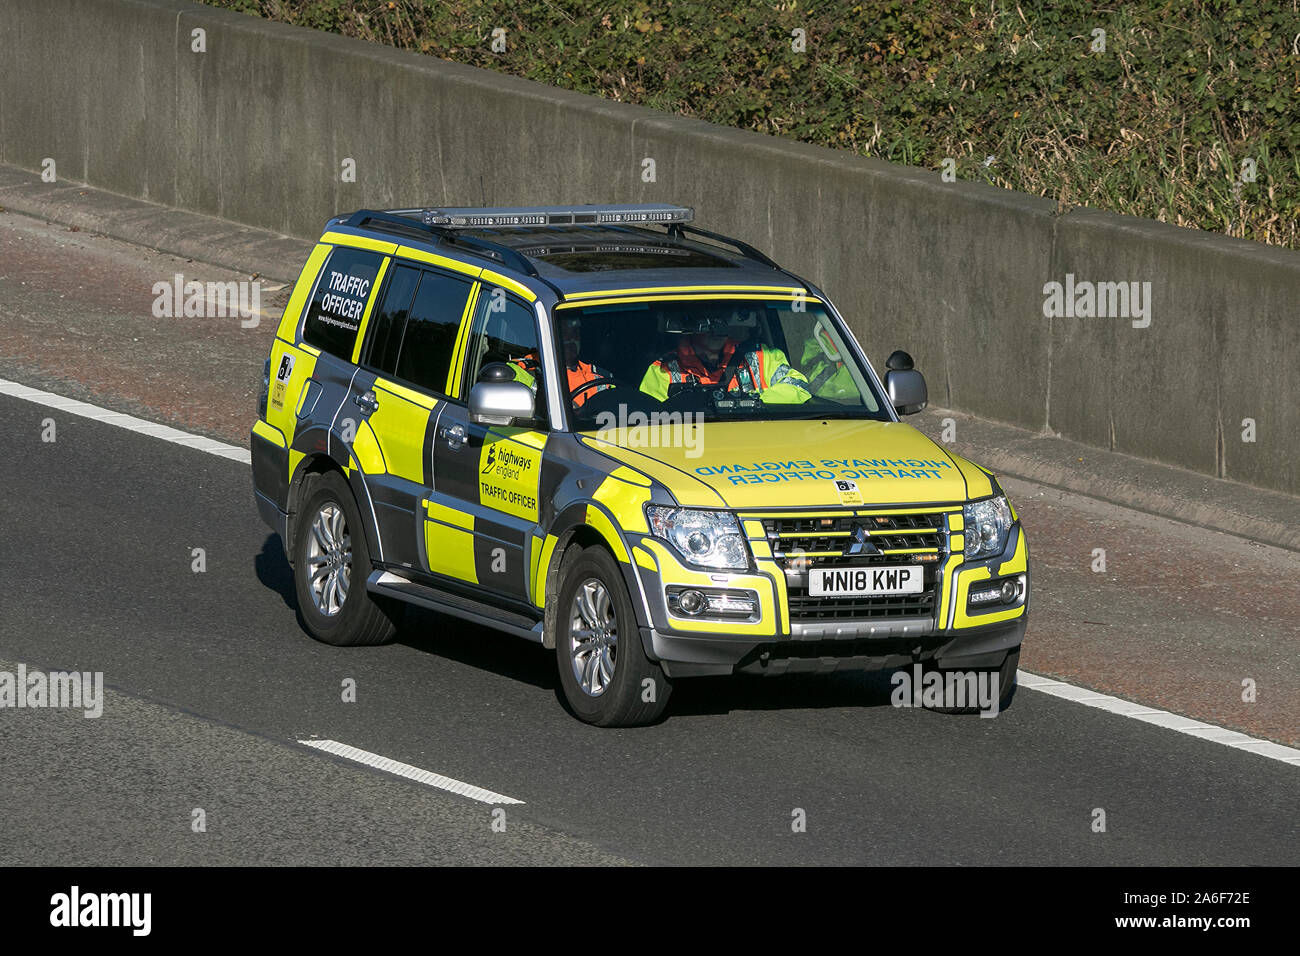 A highways agency traffic officer in a Mitsubishi Shogun patrolling the M6 motorway Stock Photo